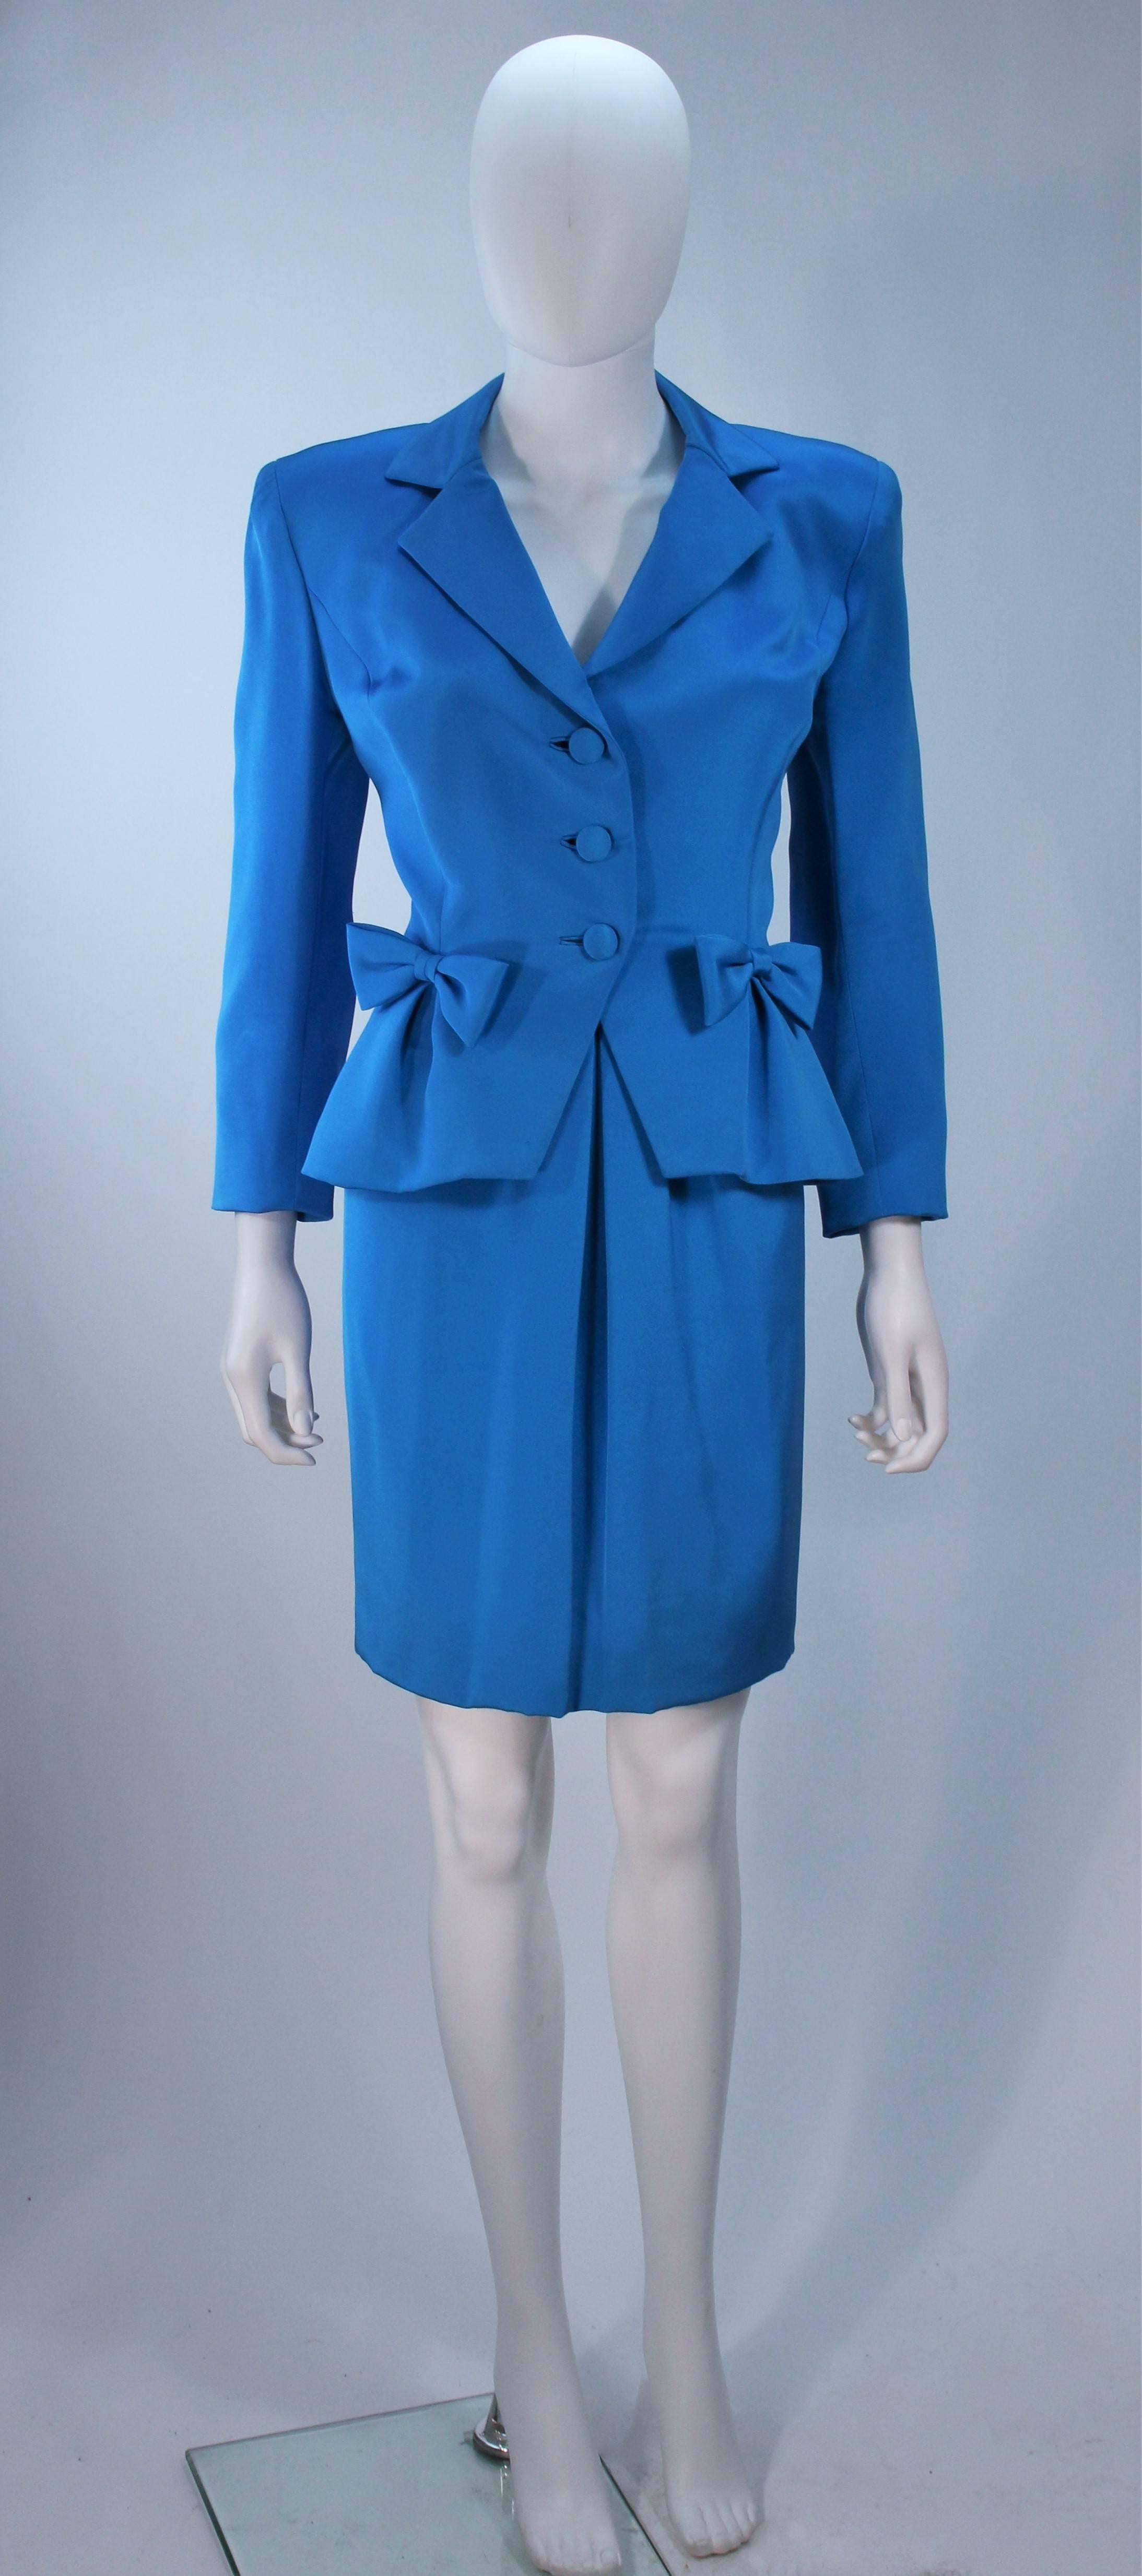  This Travilla  skirt suit is composed of a rich blue silk. The jacket features center front button closures and bow details at the waist. The classic pencil style skirt features a front pleat, there is a side zipper closure. In excellent vintage